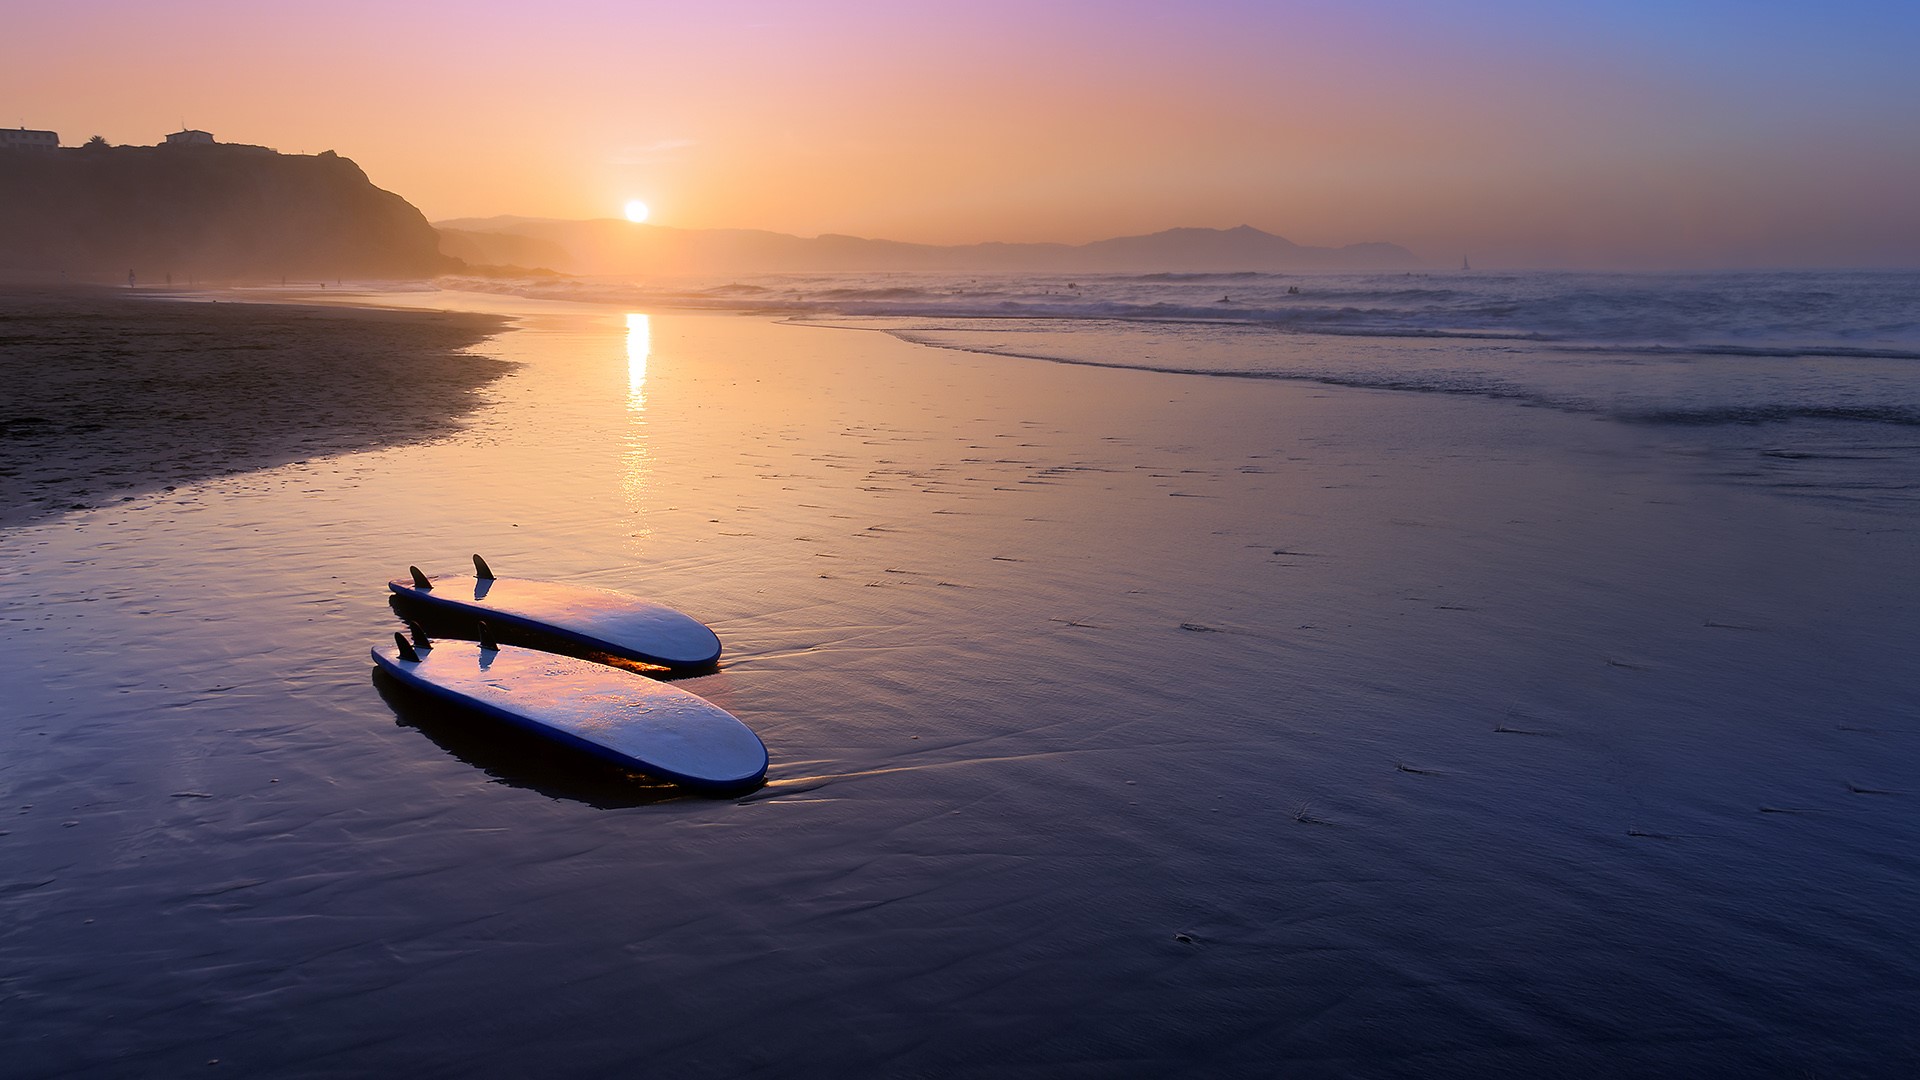 General 1920x1080 nature landscape Sun sunset surfboards reflection mountains house mist water waves Spain